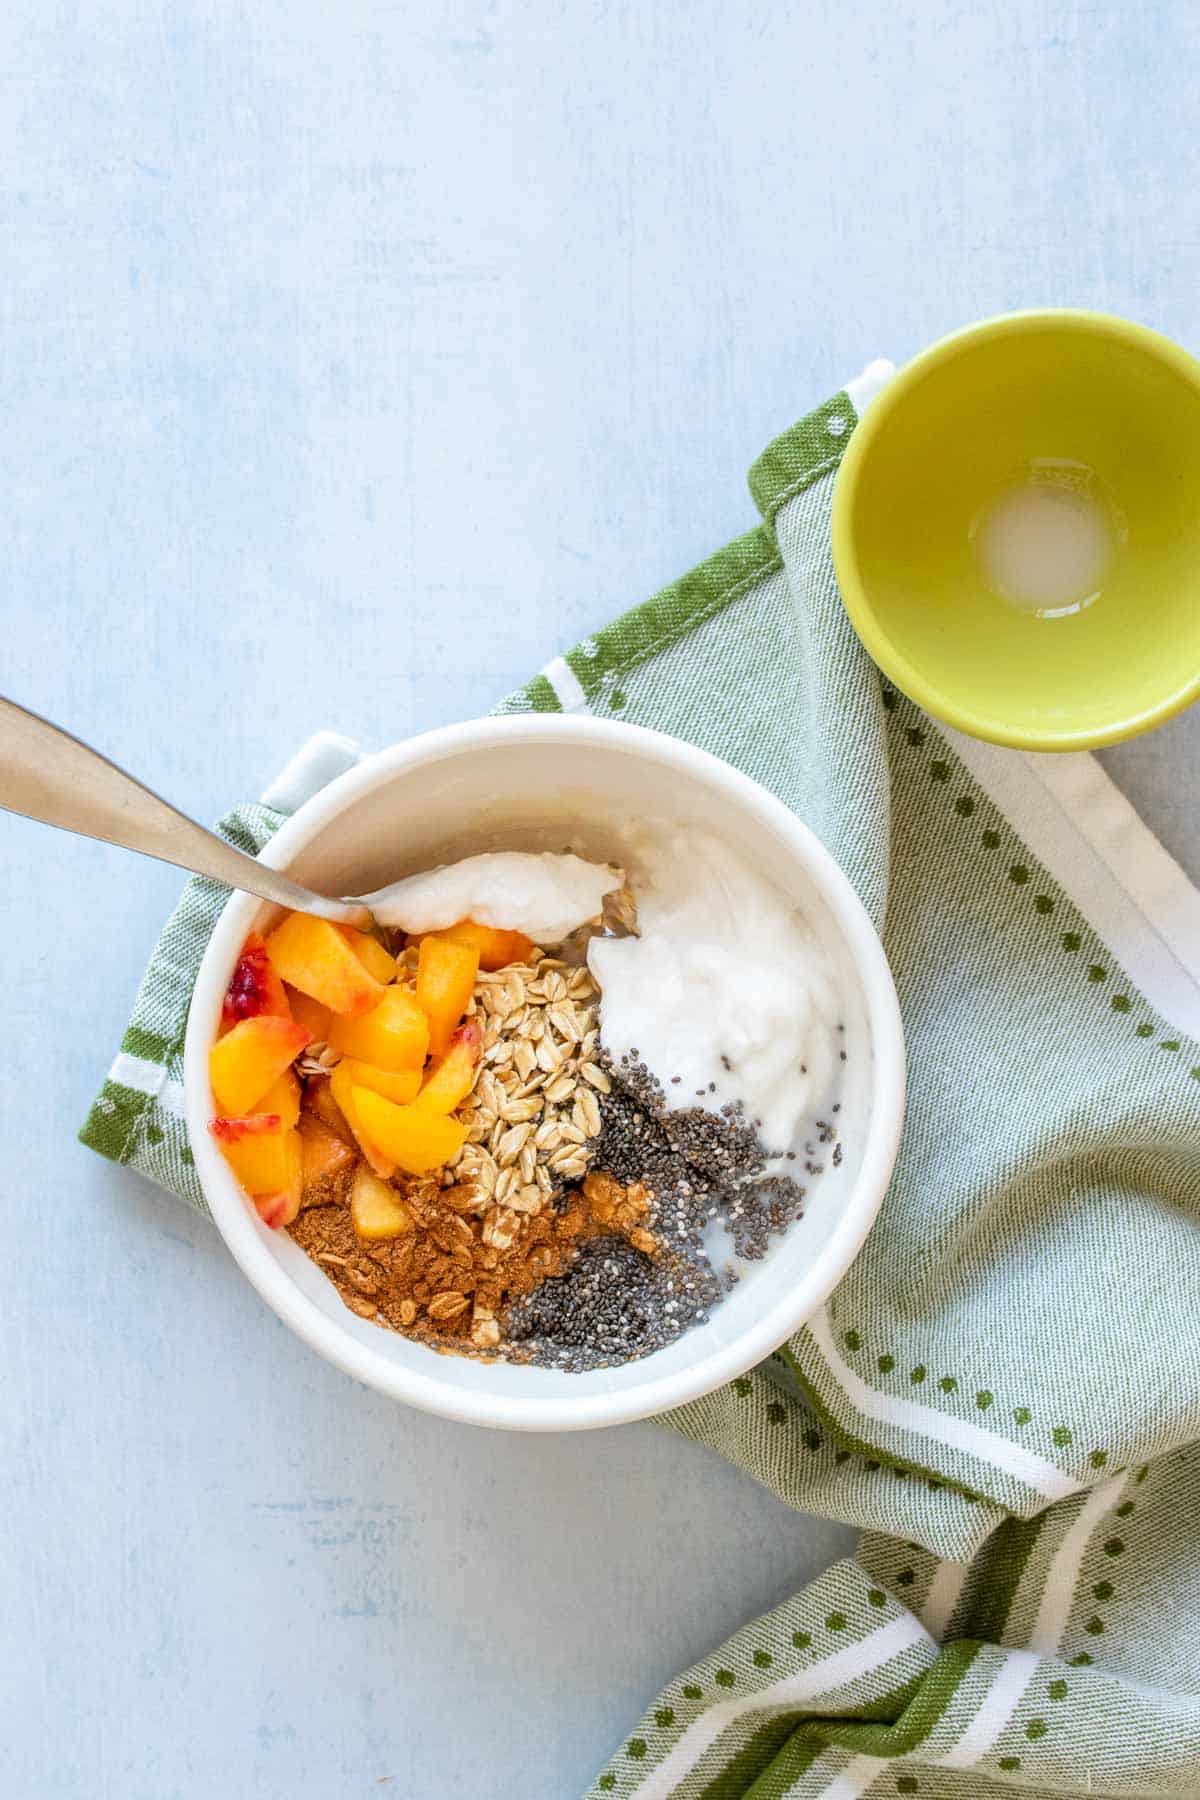 A spoon in a bowl with ingredients for peach overnight oats about to mix them